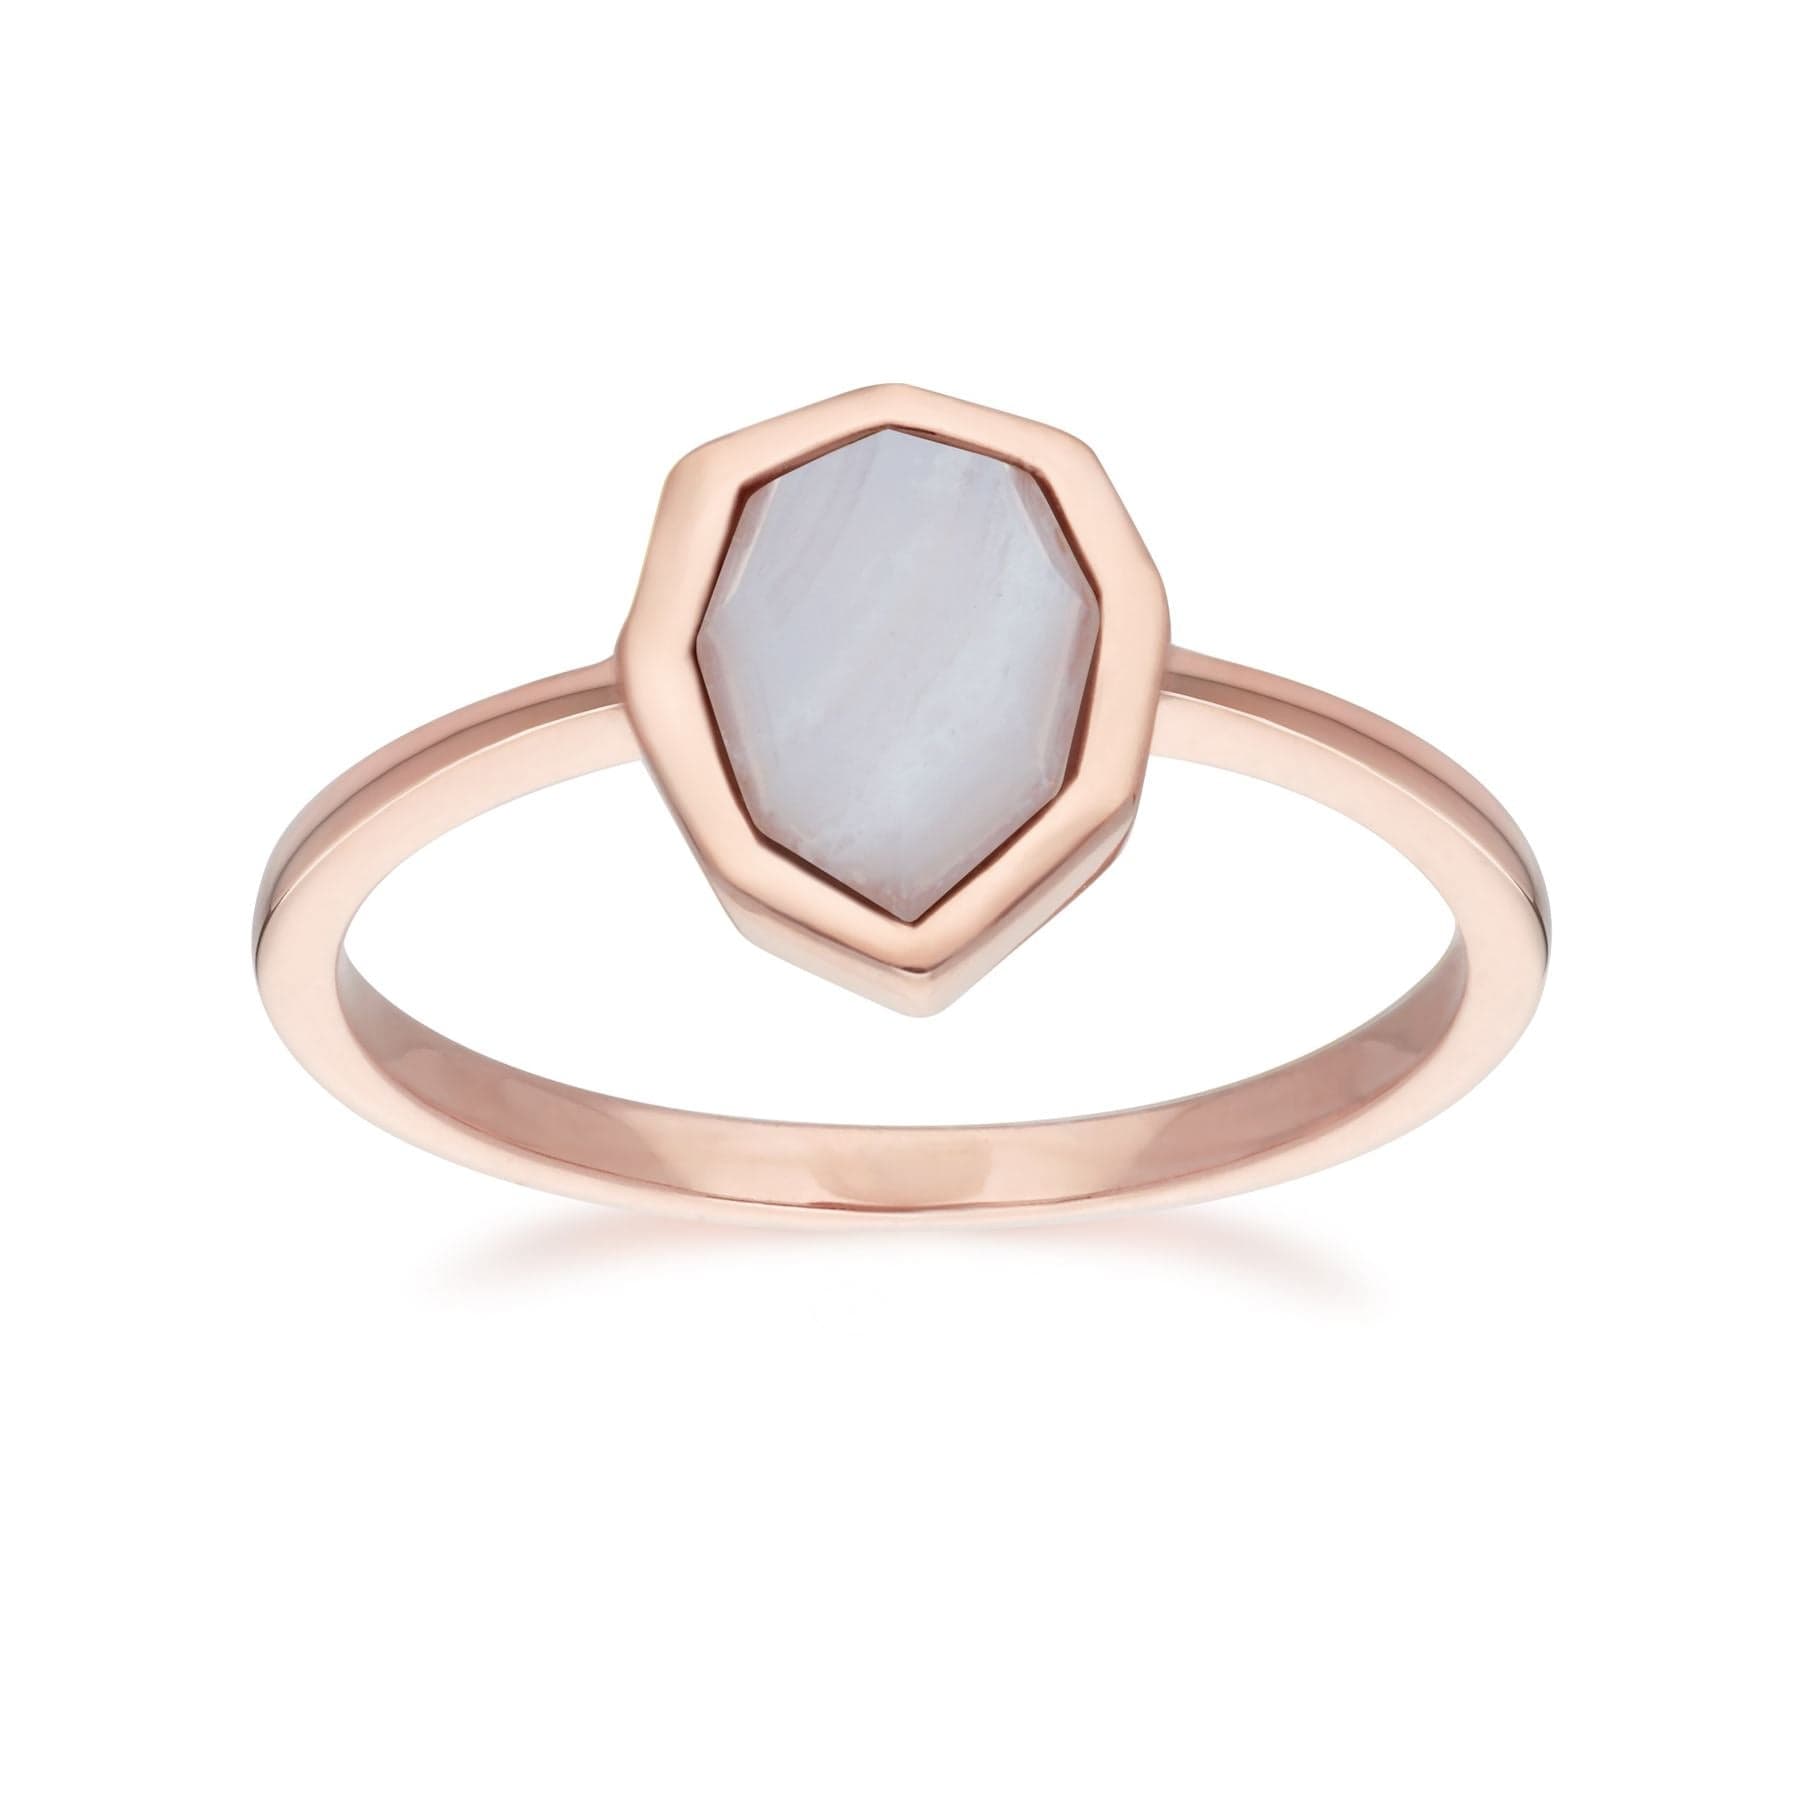 Irregular B Gem Blue Lace Agate Ring in Rose Gold Plated Sterling Silver Front